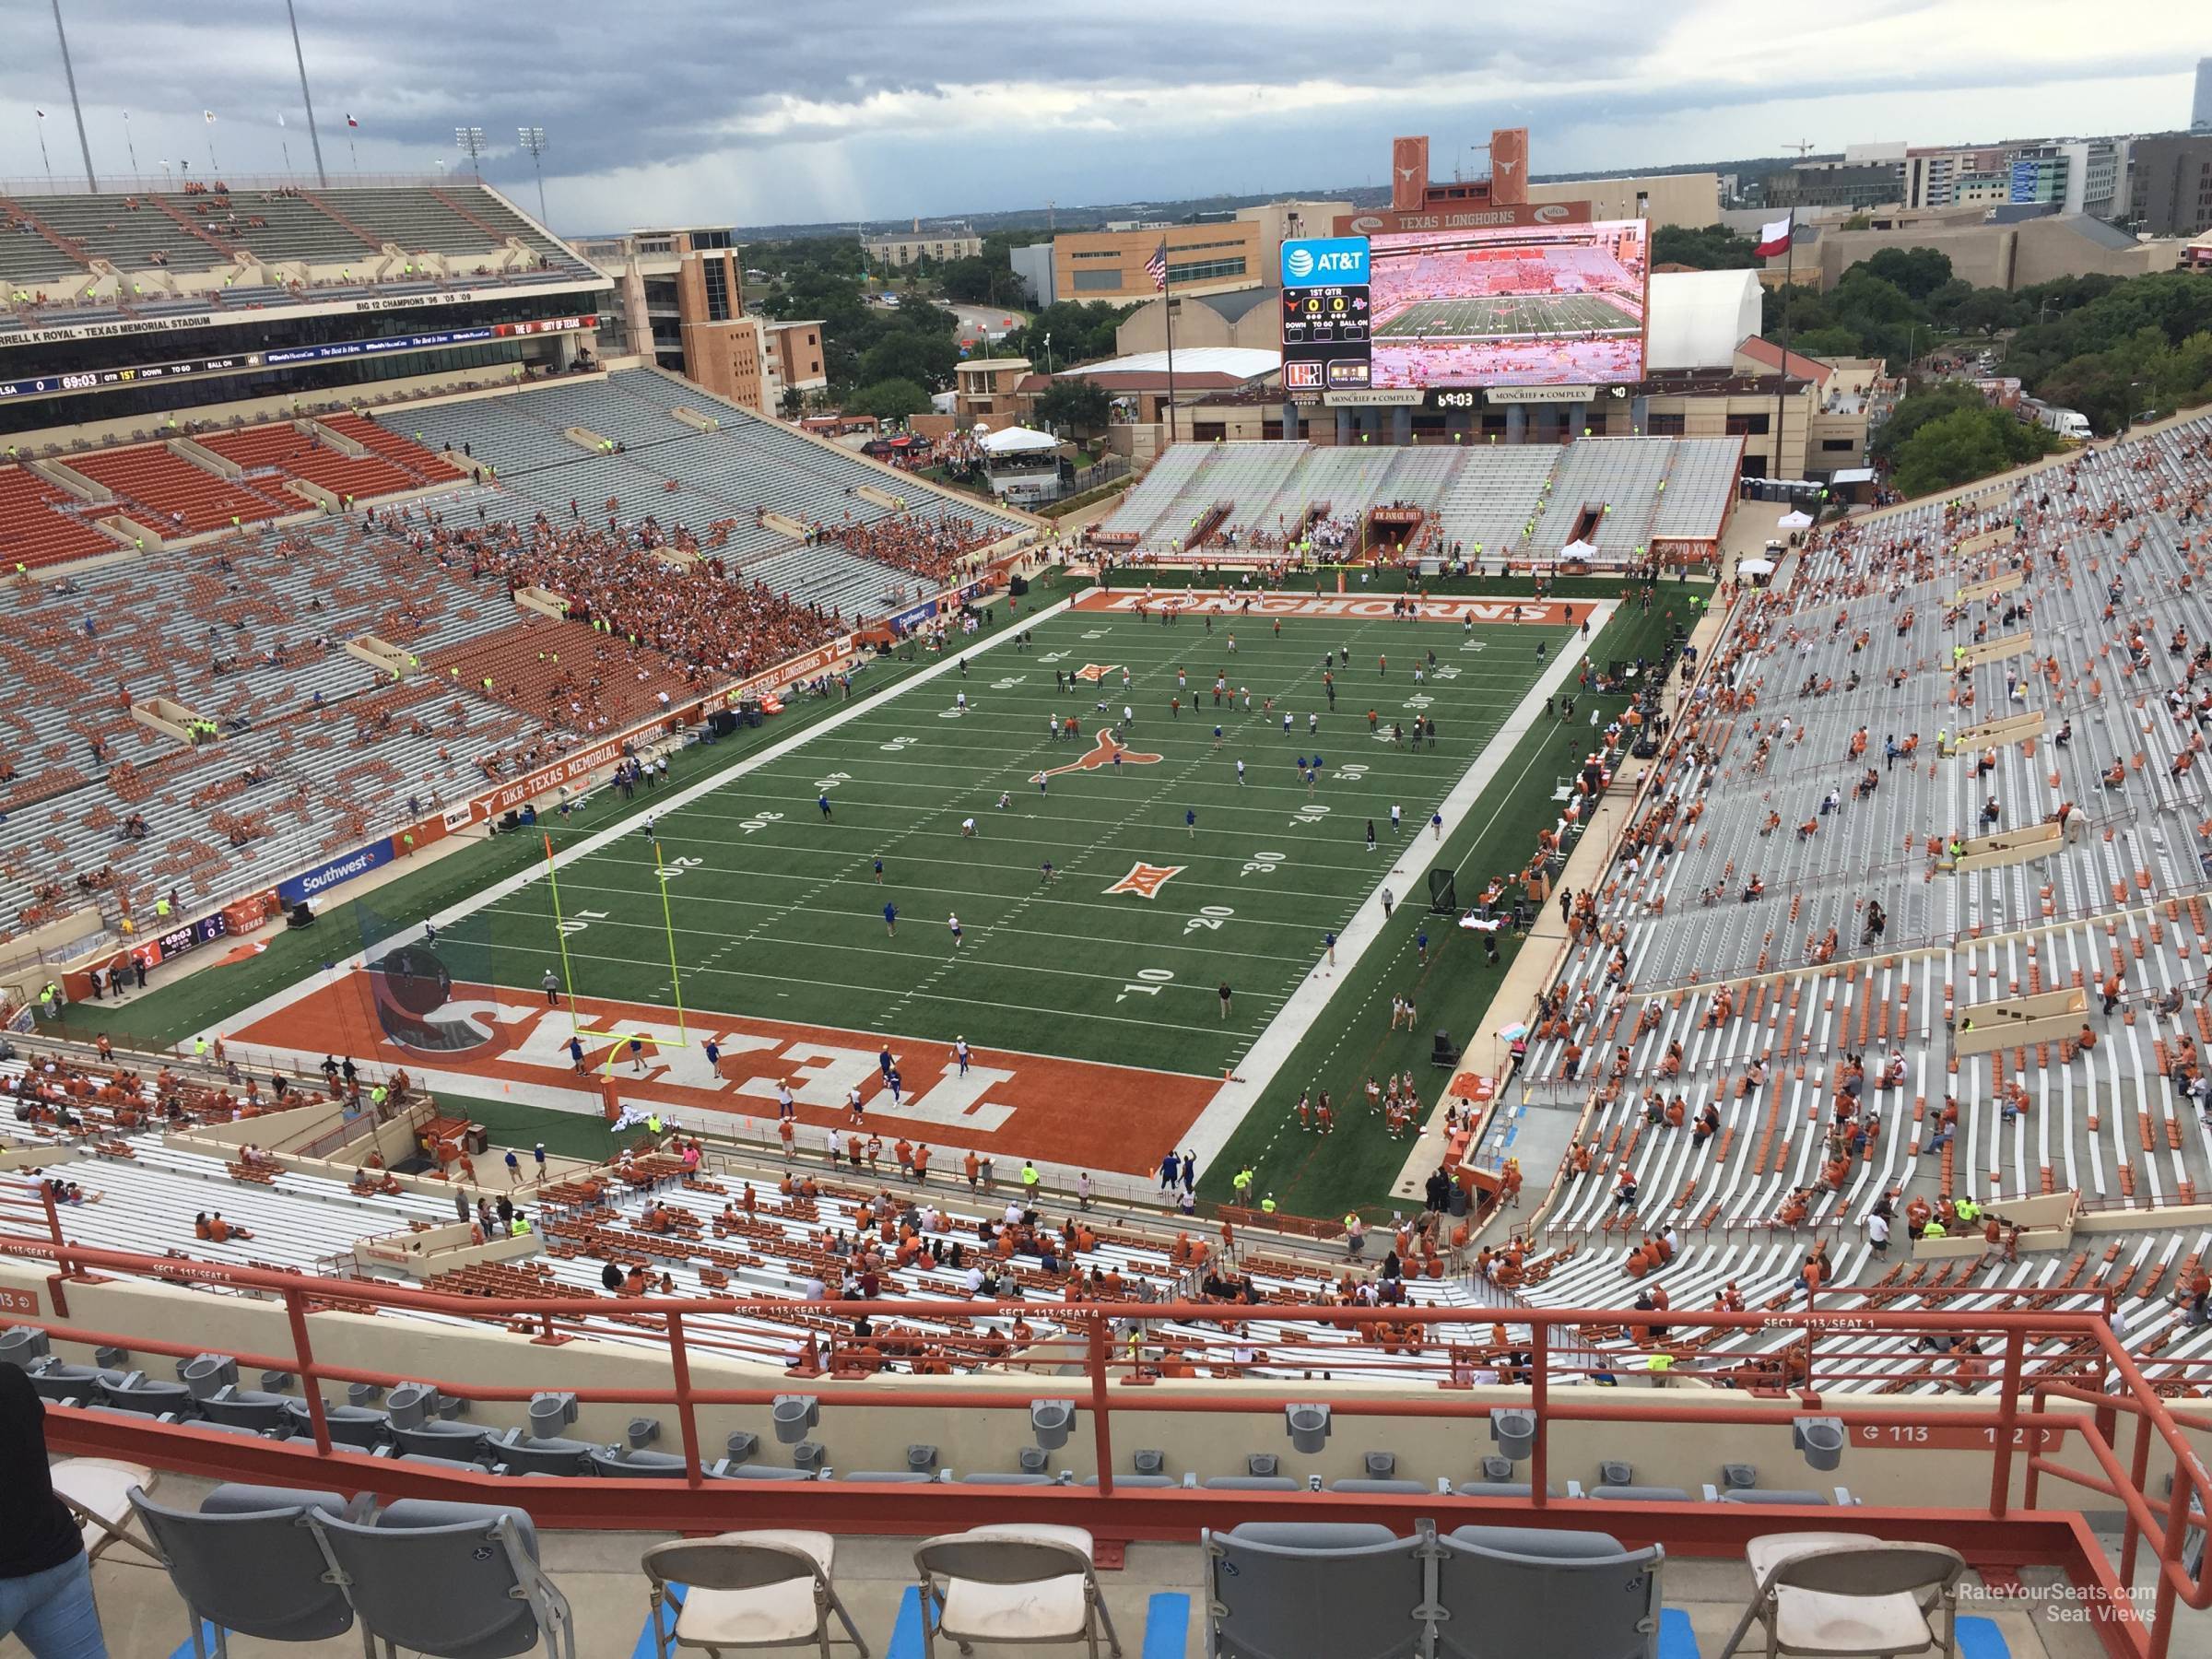 section 113, row 10 seat view  - dkr-texas memorial stadium